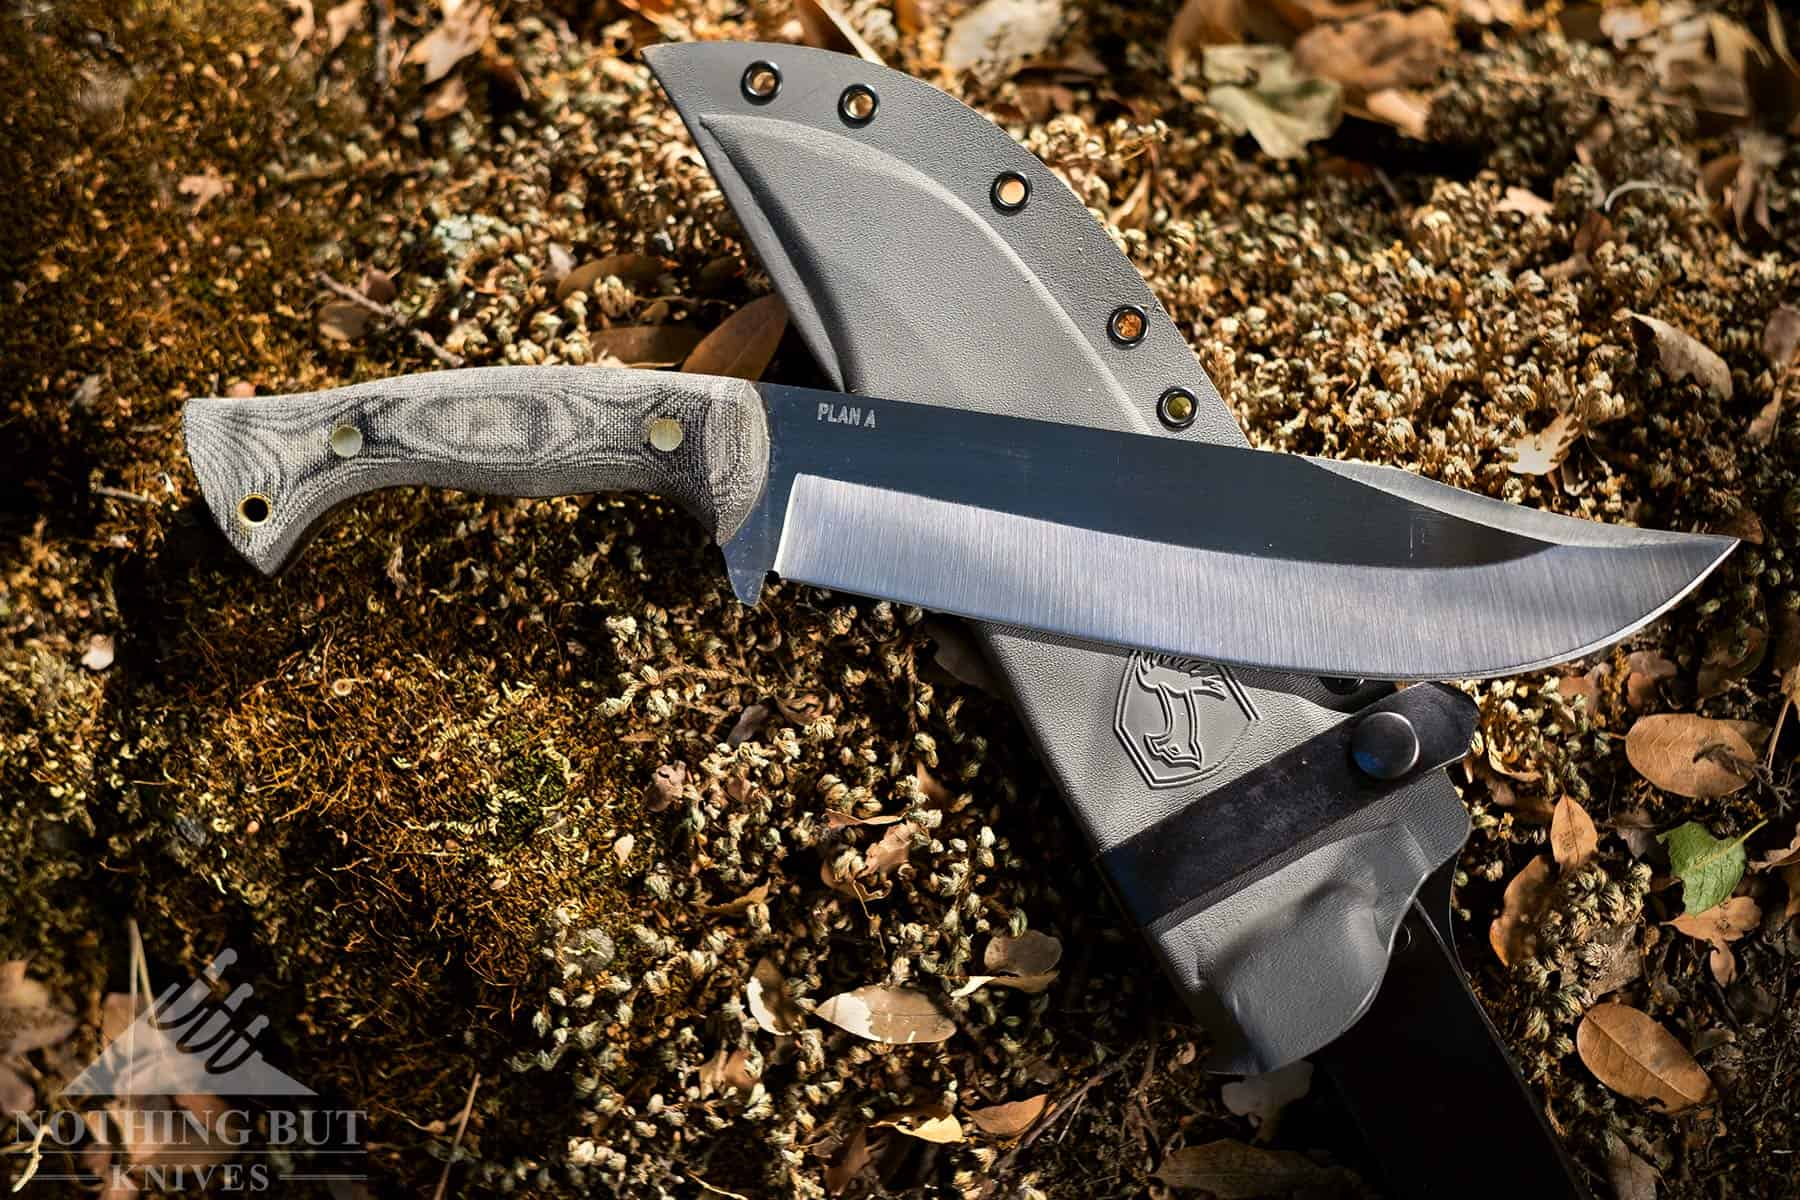 The Condor Plan A Bowie shown here with it's kydex sheath on a mossy rock outdoors.